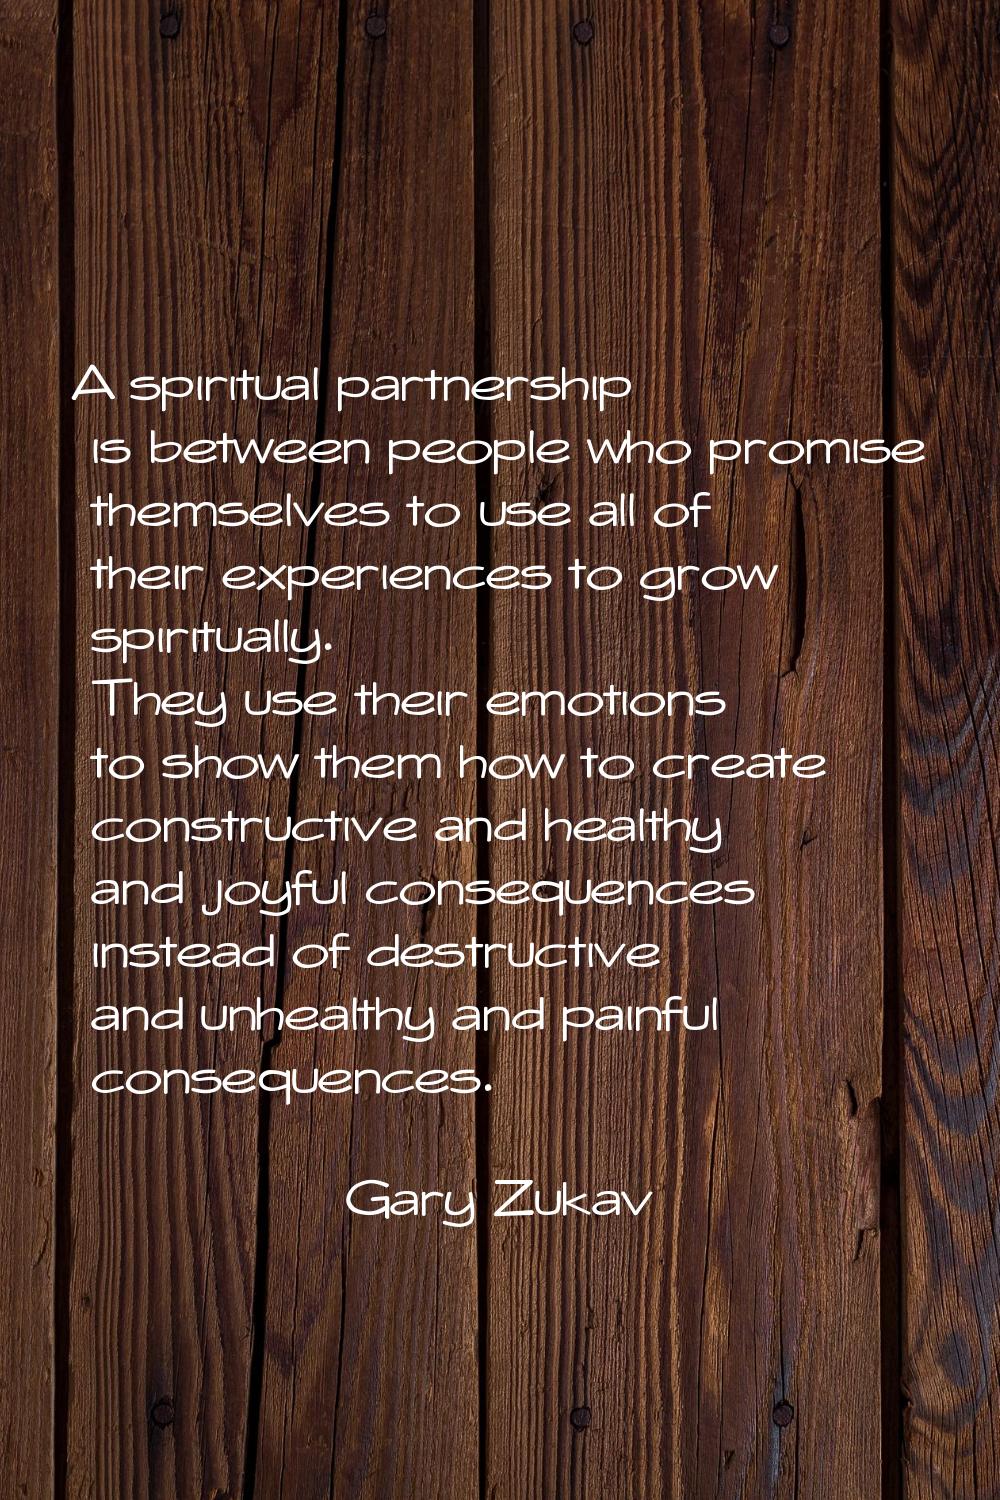 A spiritual partnership is between people who promise themselves to use all of their experiences to